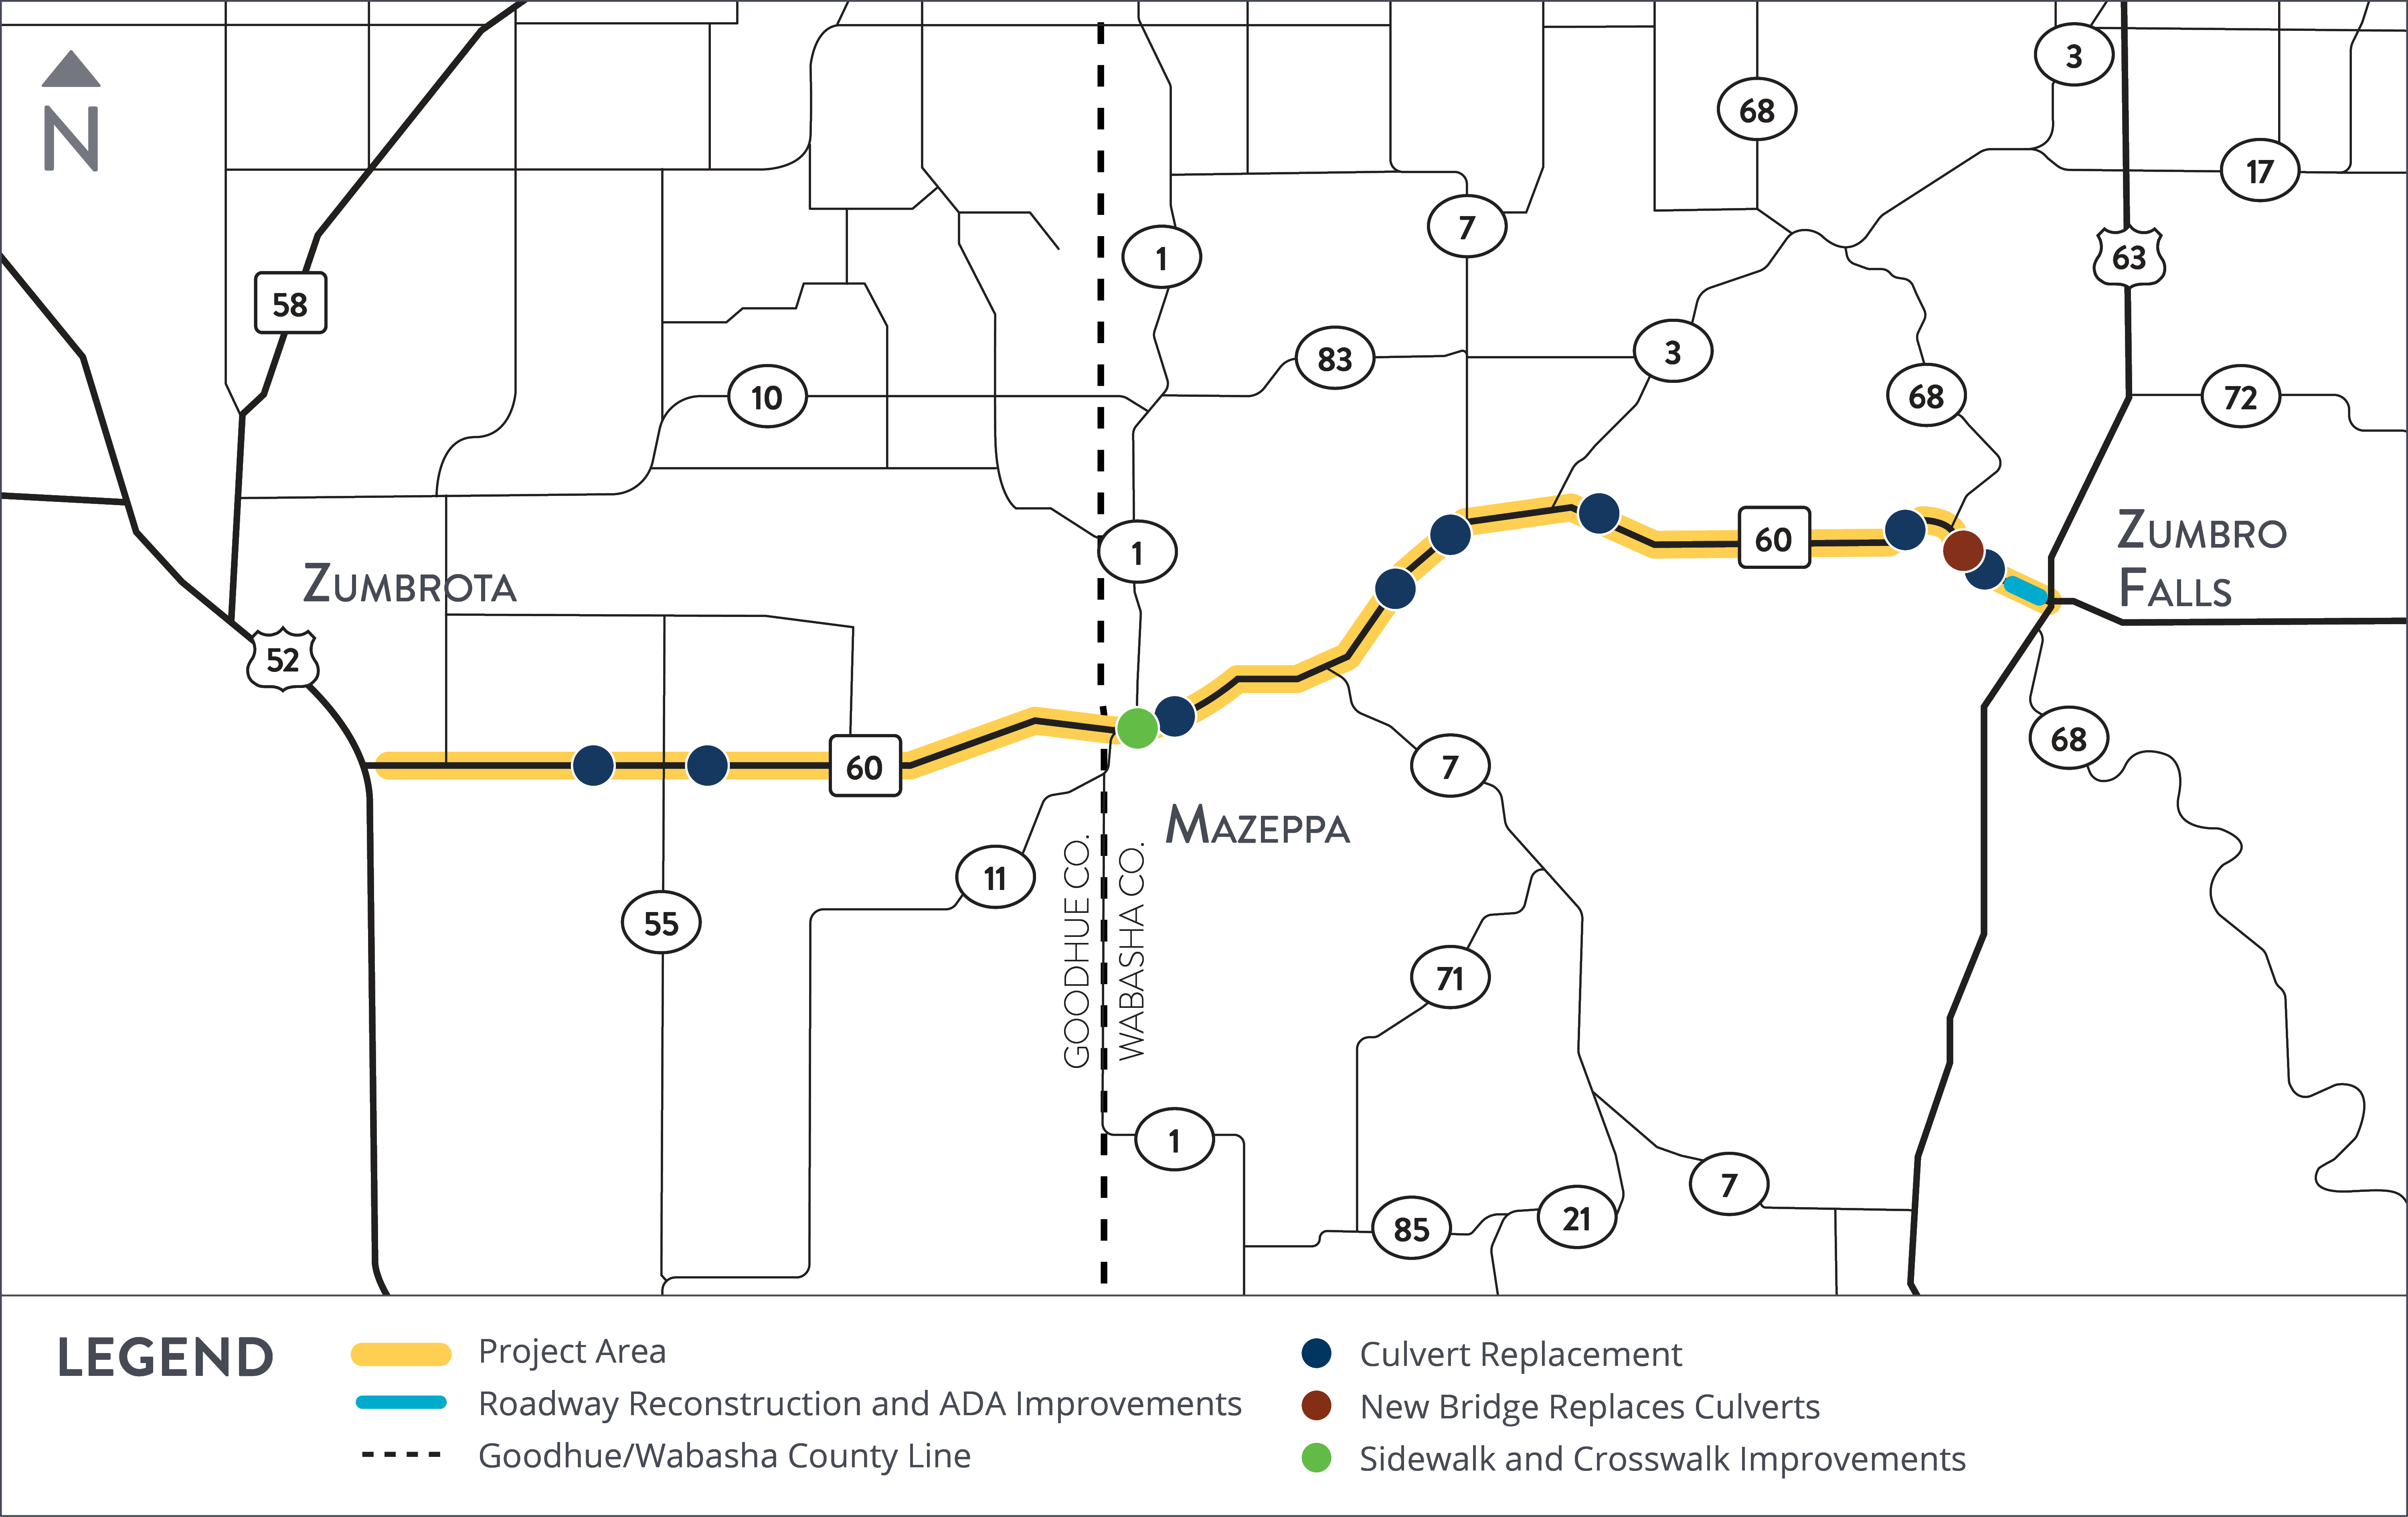 The project area runs west from Zumbro falls to Zumbrota on Interstate 60. Blue dots indicate culvert replacements, a red dot indicates a bridge replacement in the east and a green dot indicates intersection and ADA improvements at the cross section of goodhije colorado and route 60.